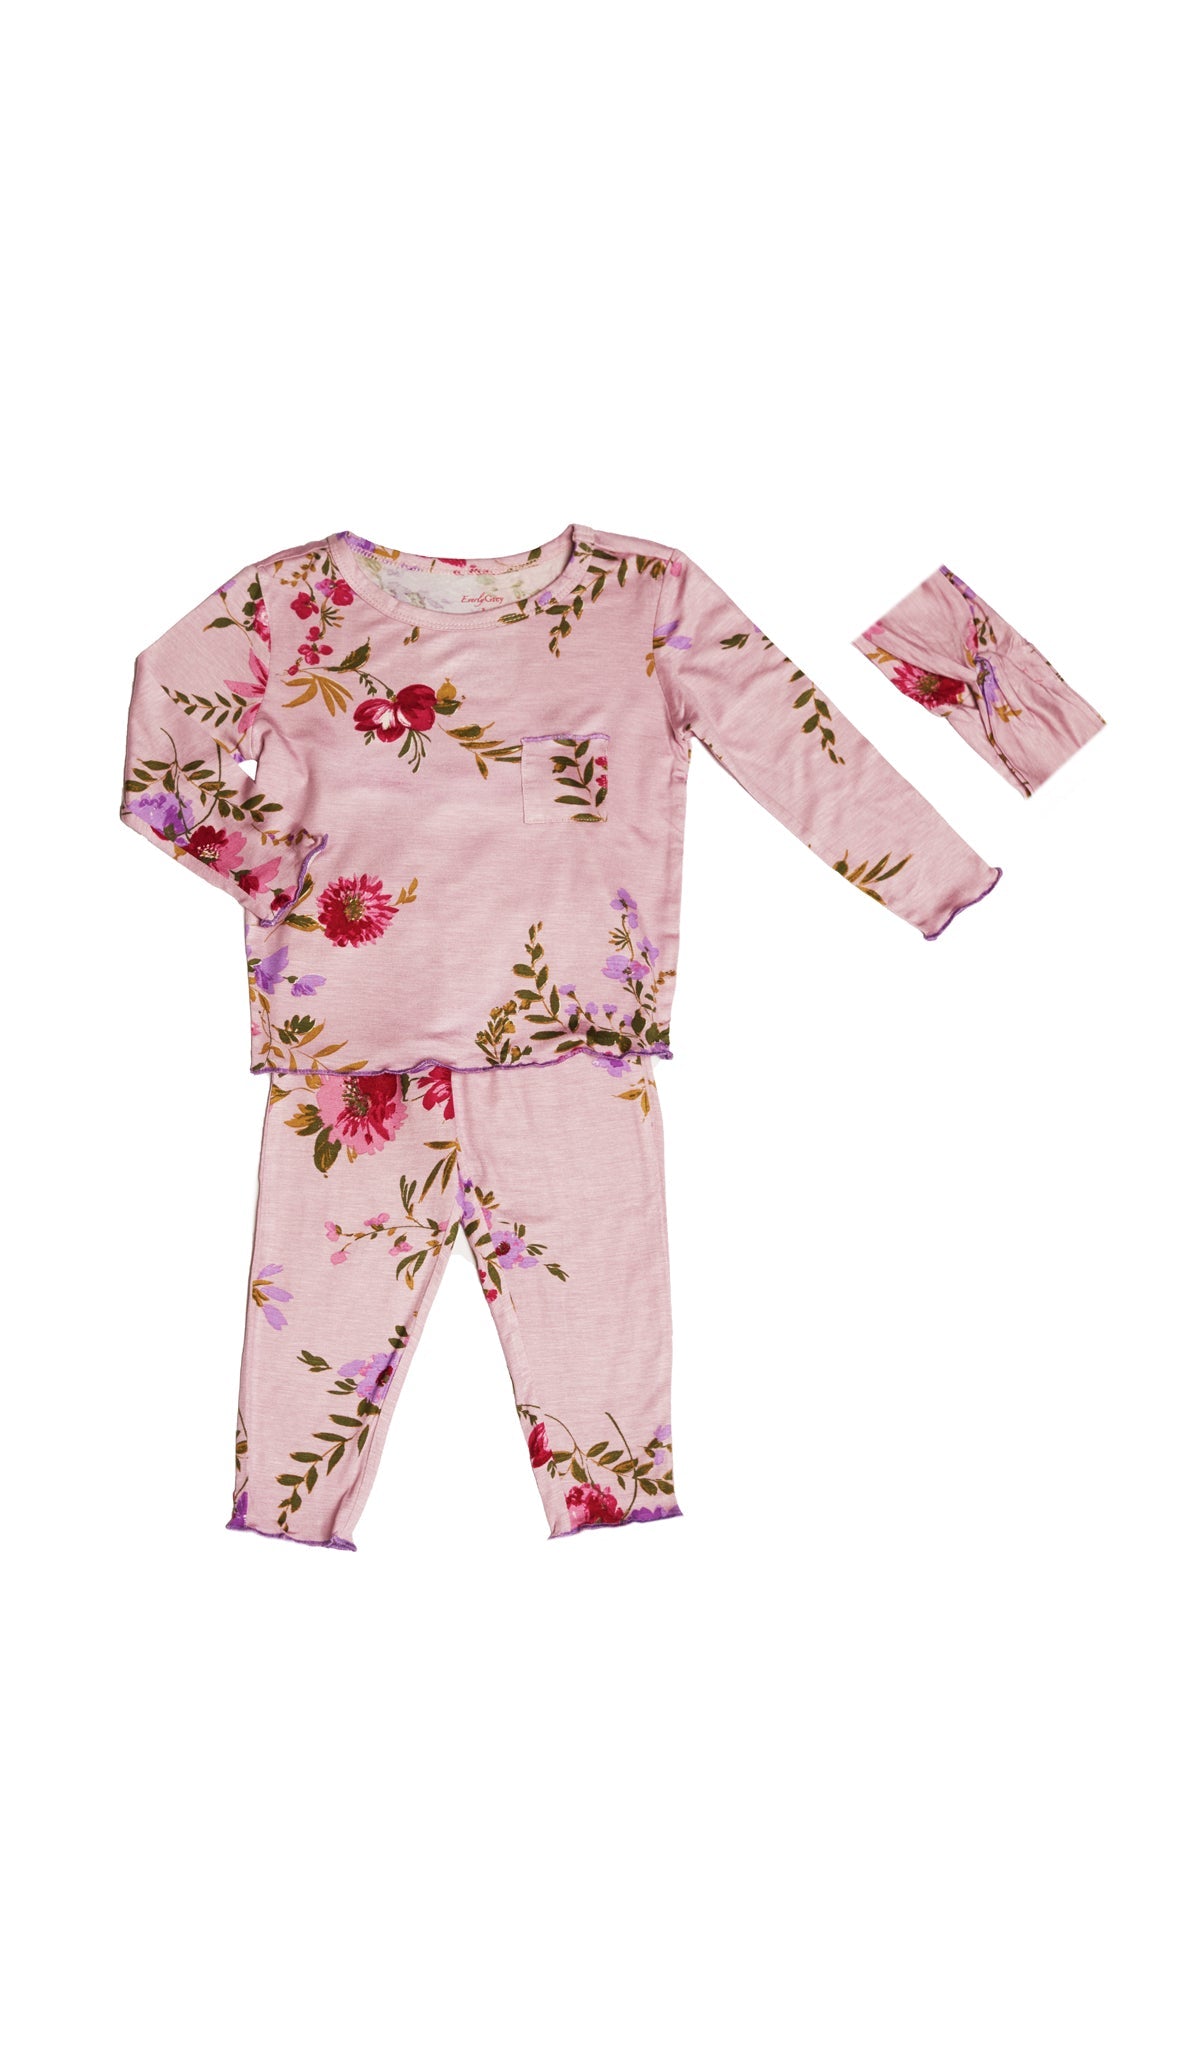 Dusty Rose Charlie Baby 3-Piece Pant PJ. Long sleeve top with smocked waistband pant and matching headwrap. Lettuce trim detail on sleeve edge, top and pant hem.